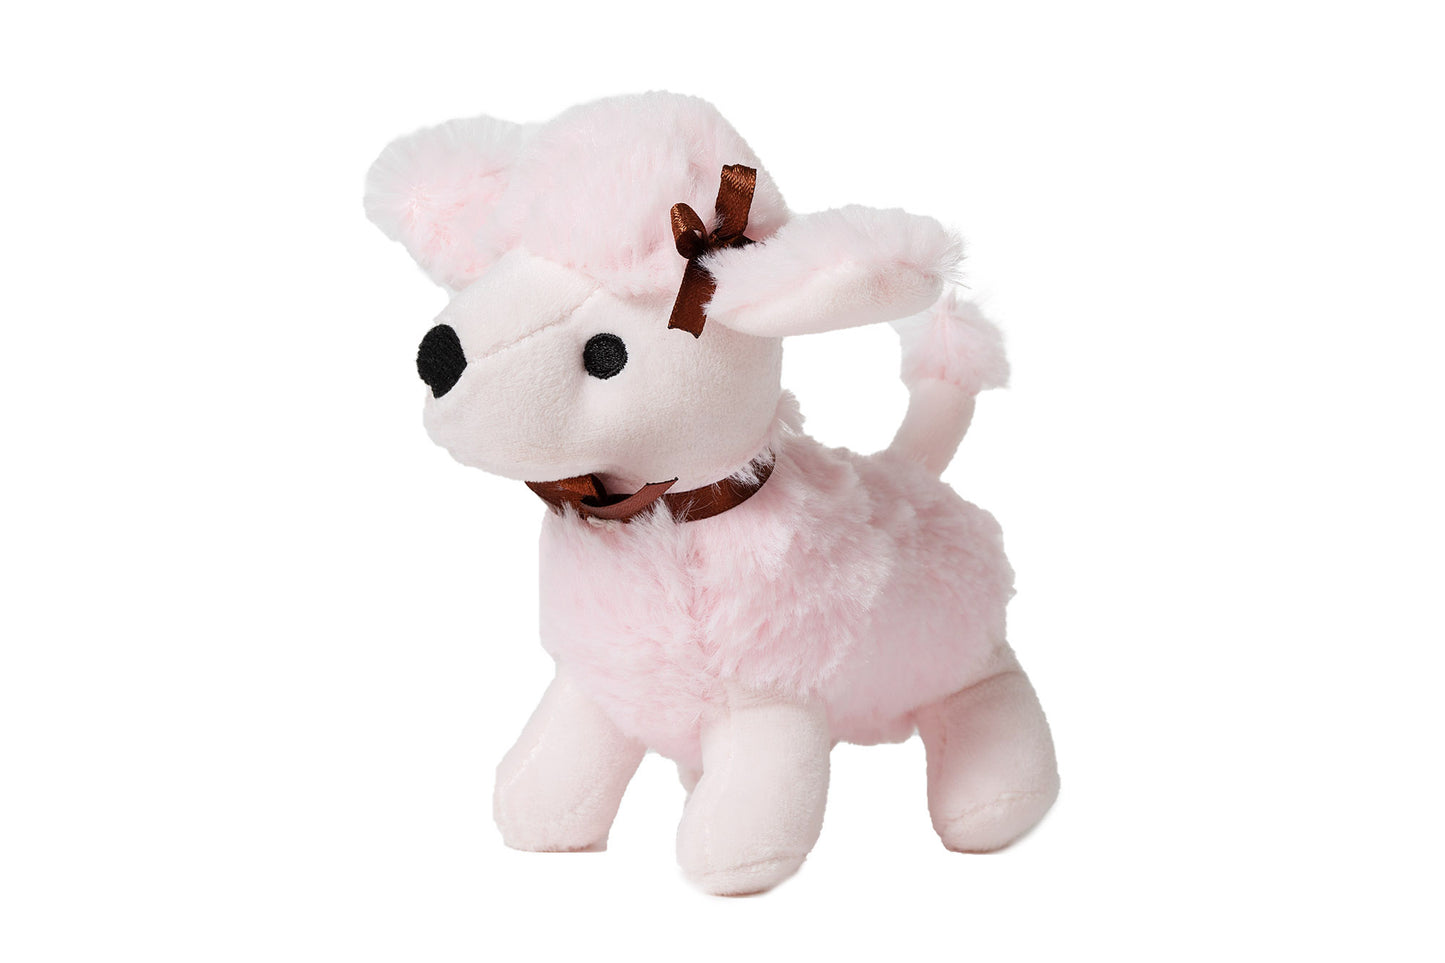 Canine Styles - Singing Dog Toy - Interactive Toy